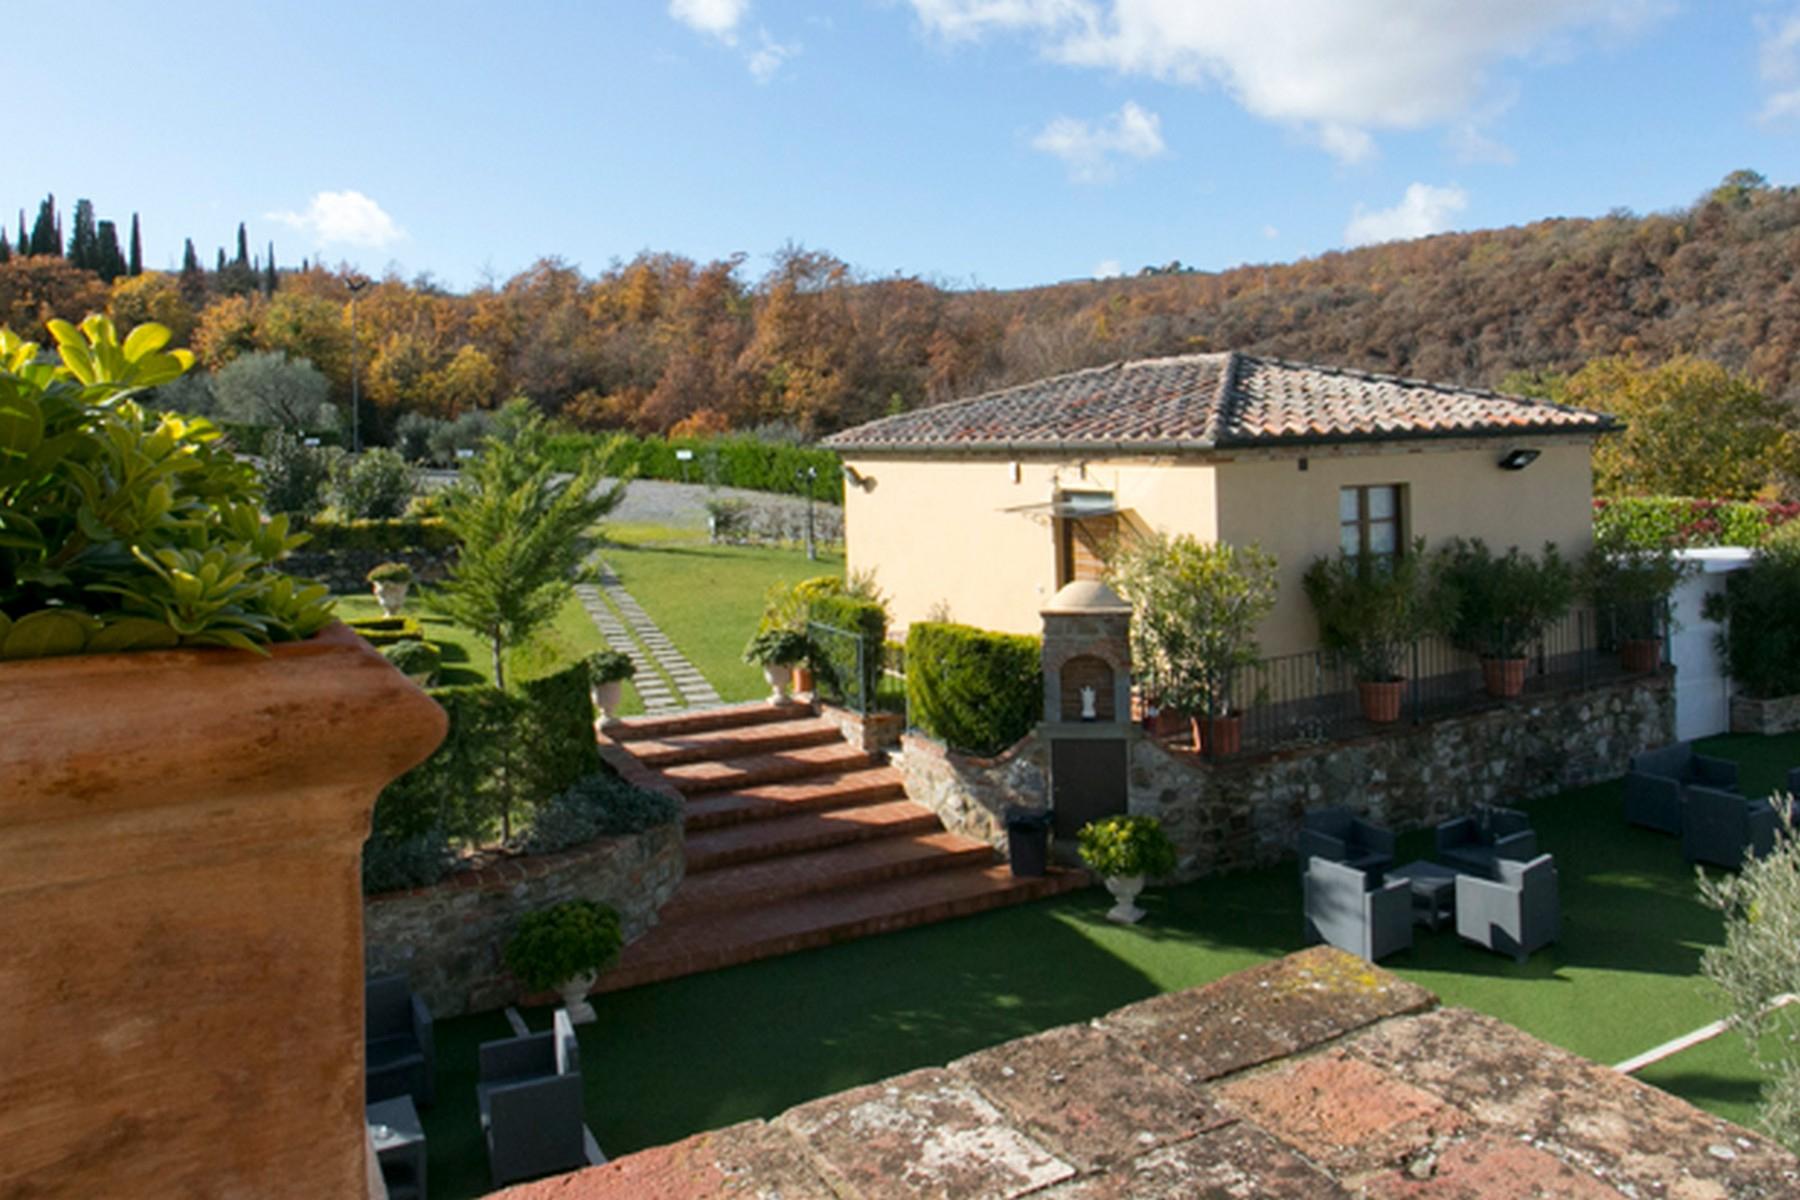 Beautiful Boutique Hotel with Restaurant and SPA in the hills of Torrita di Siena - 16